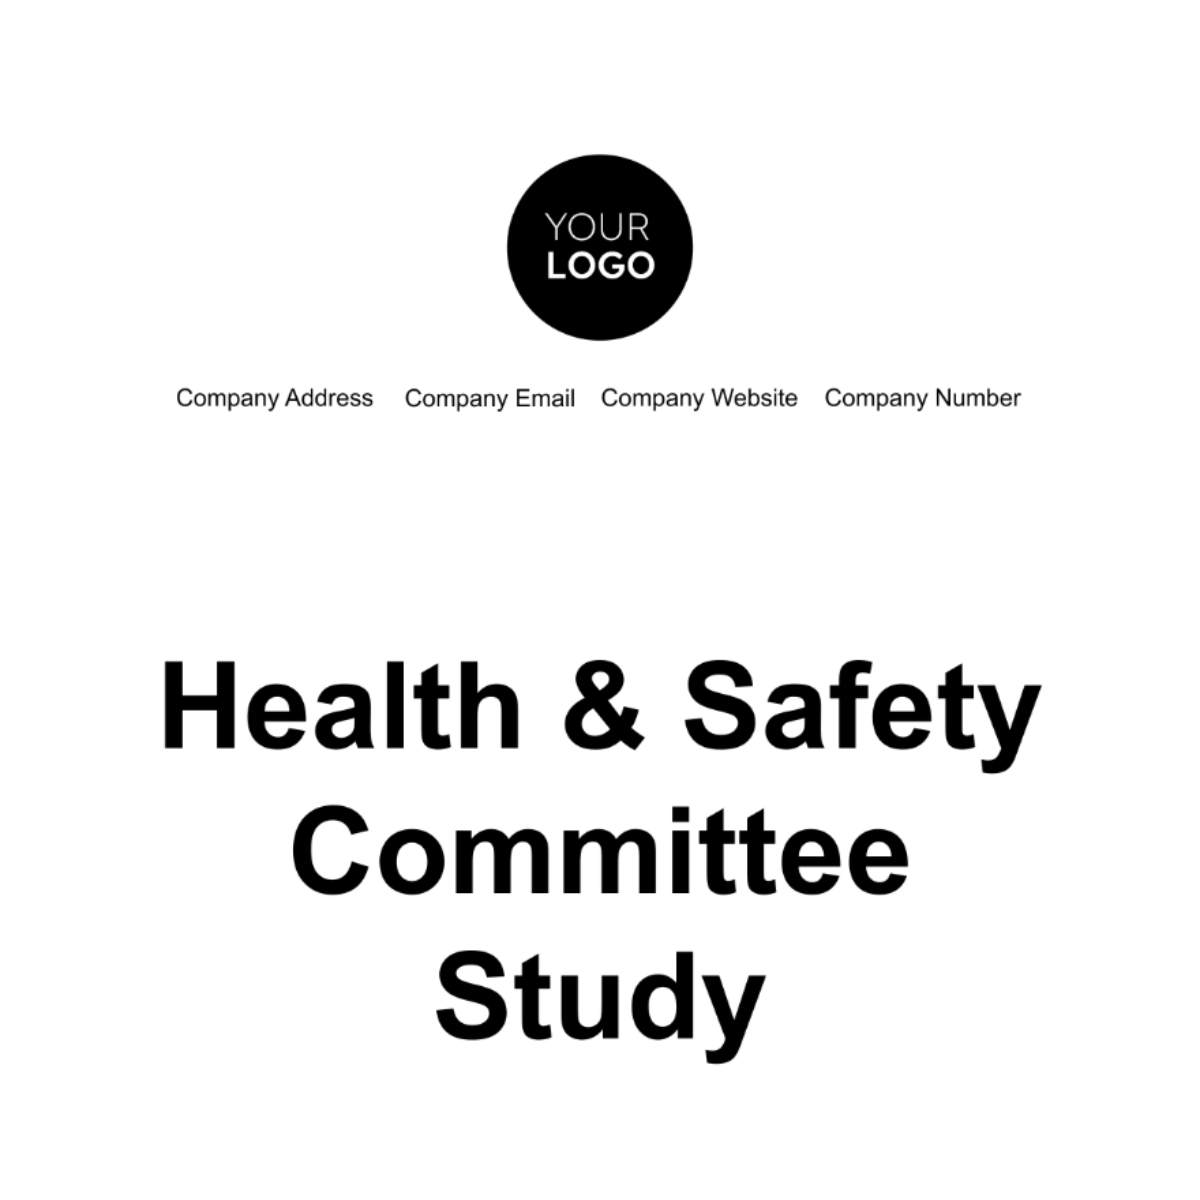 Free Health & Safety Committee Study Template